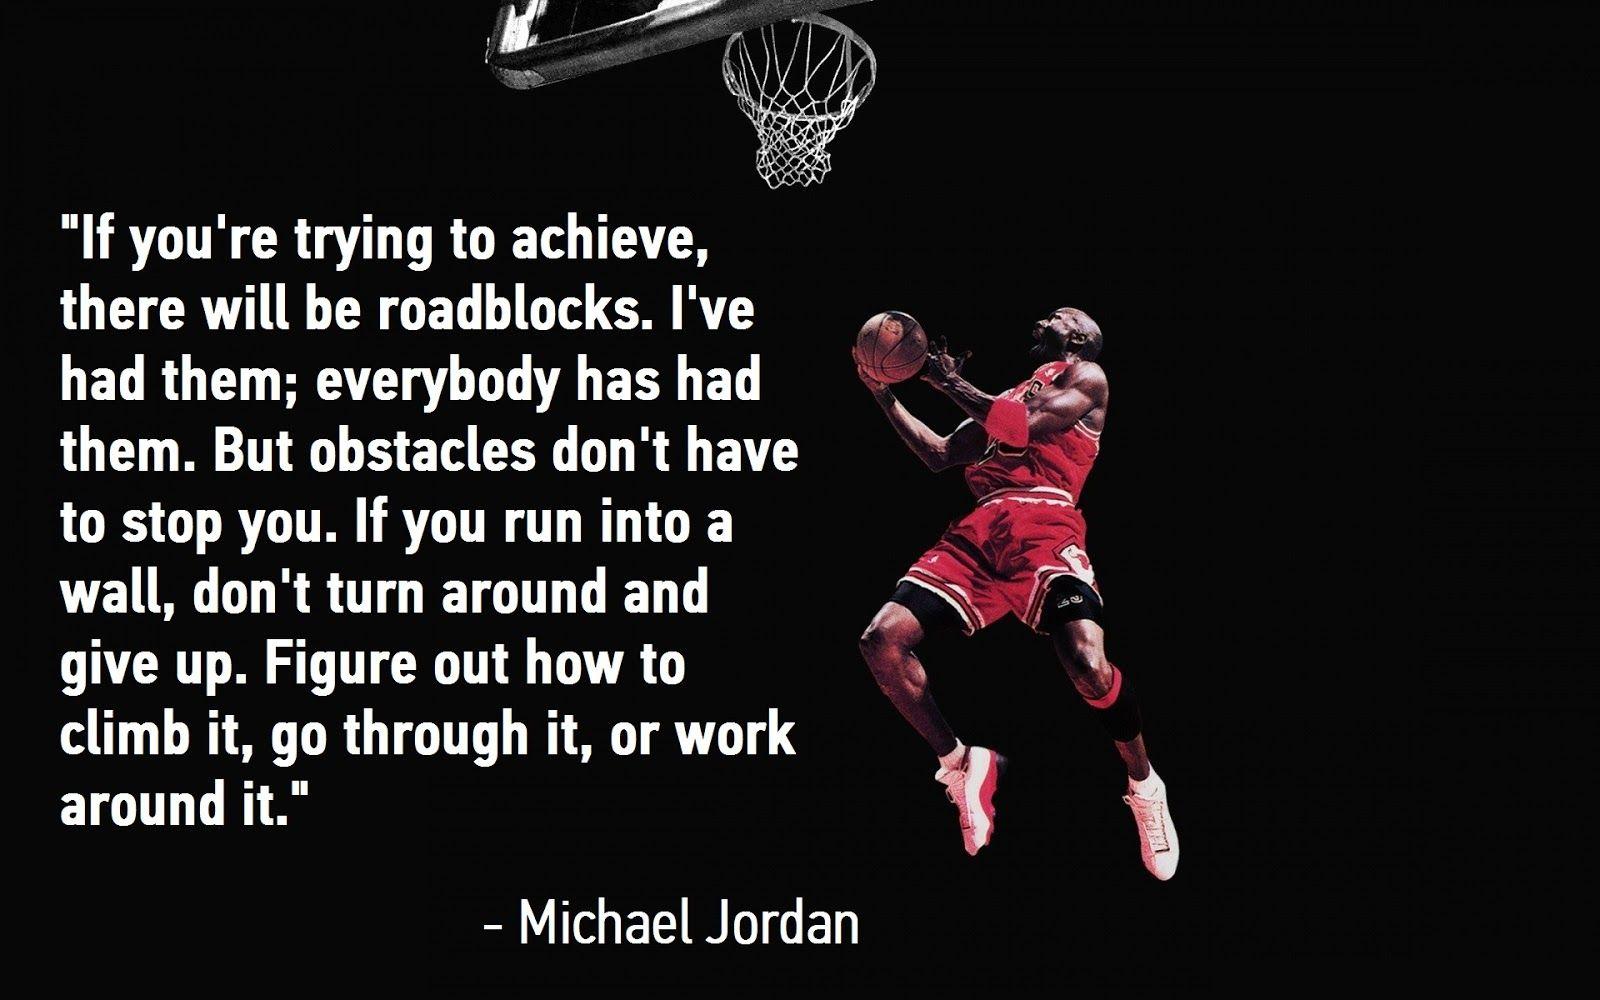 inspirational sports quotes wallpaper